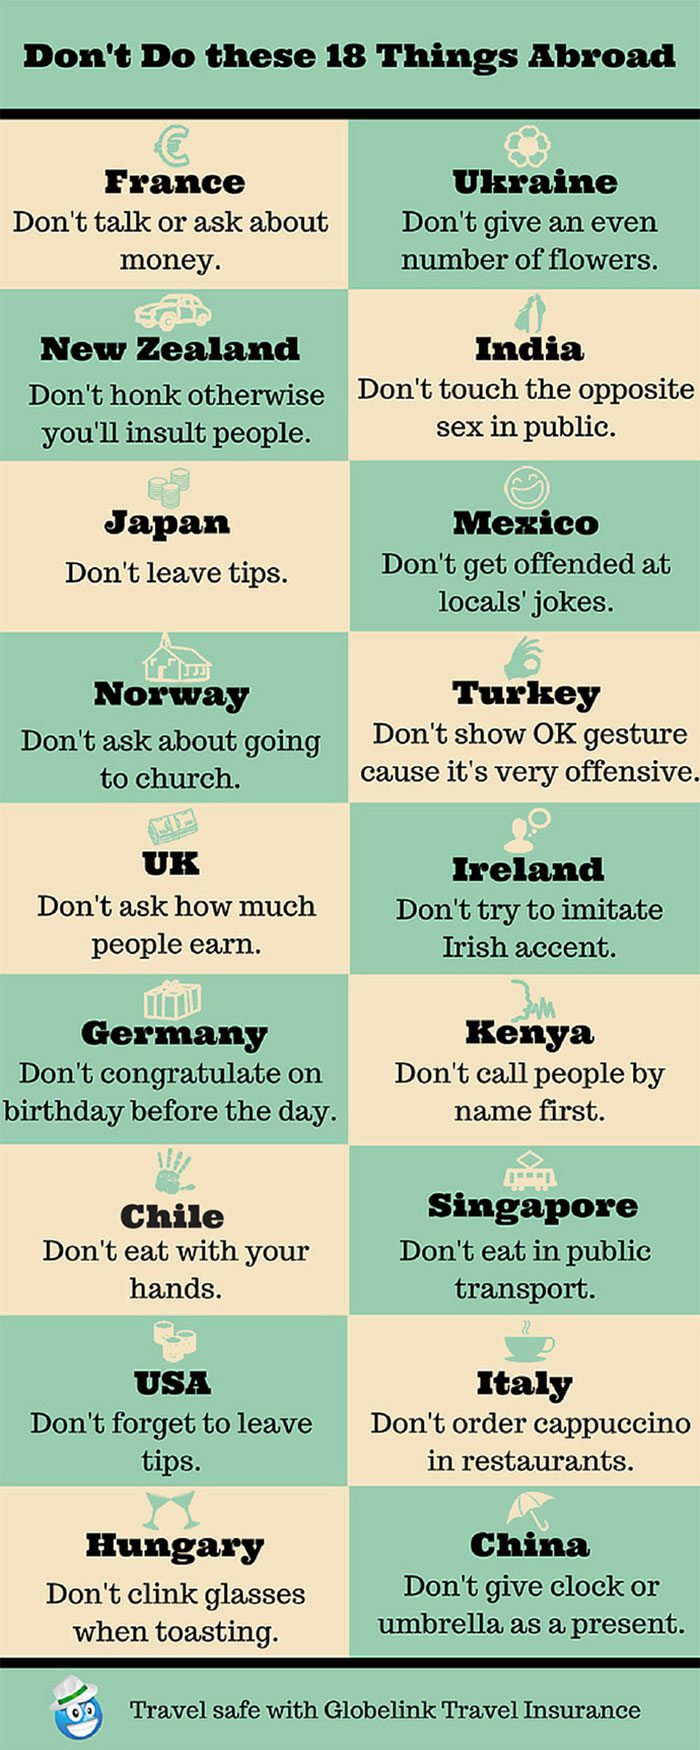 18 Things You Shouldn't Do Abroad